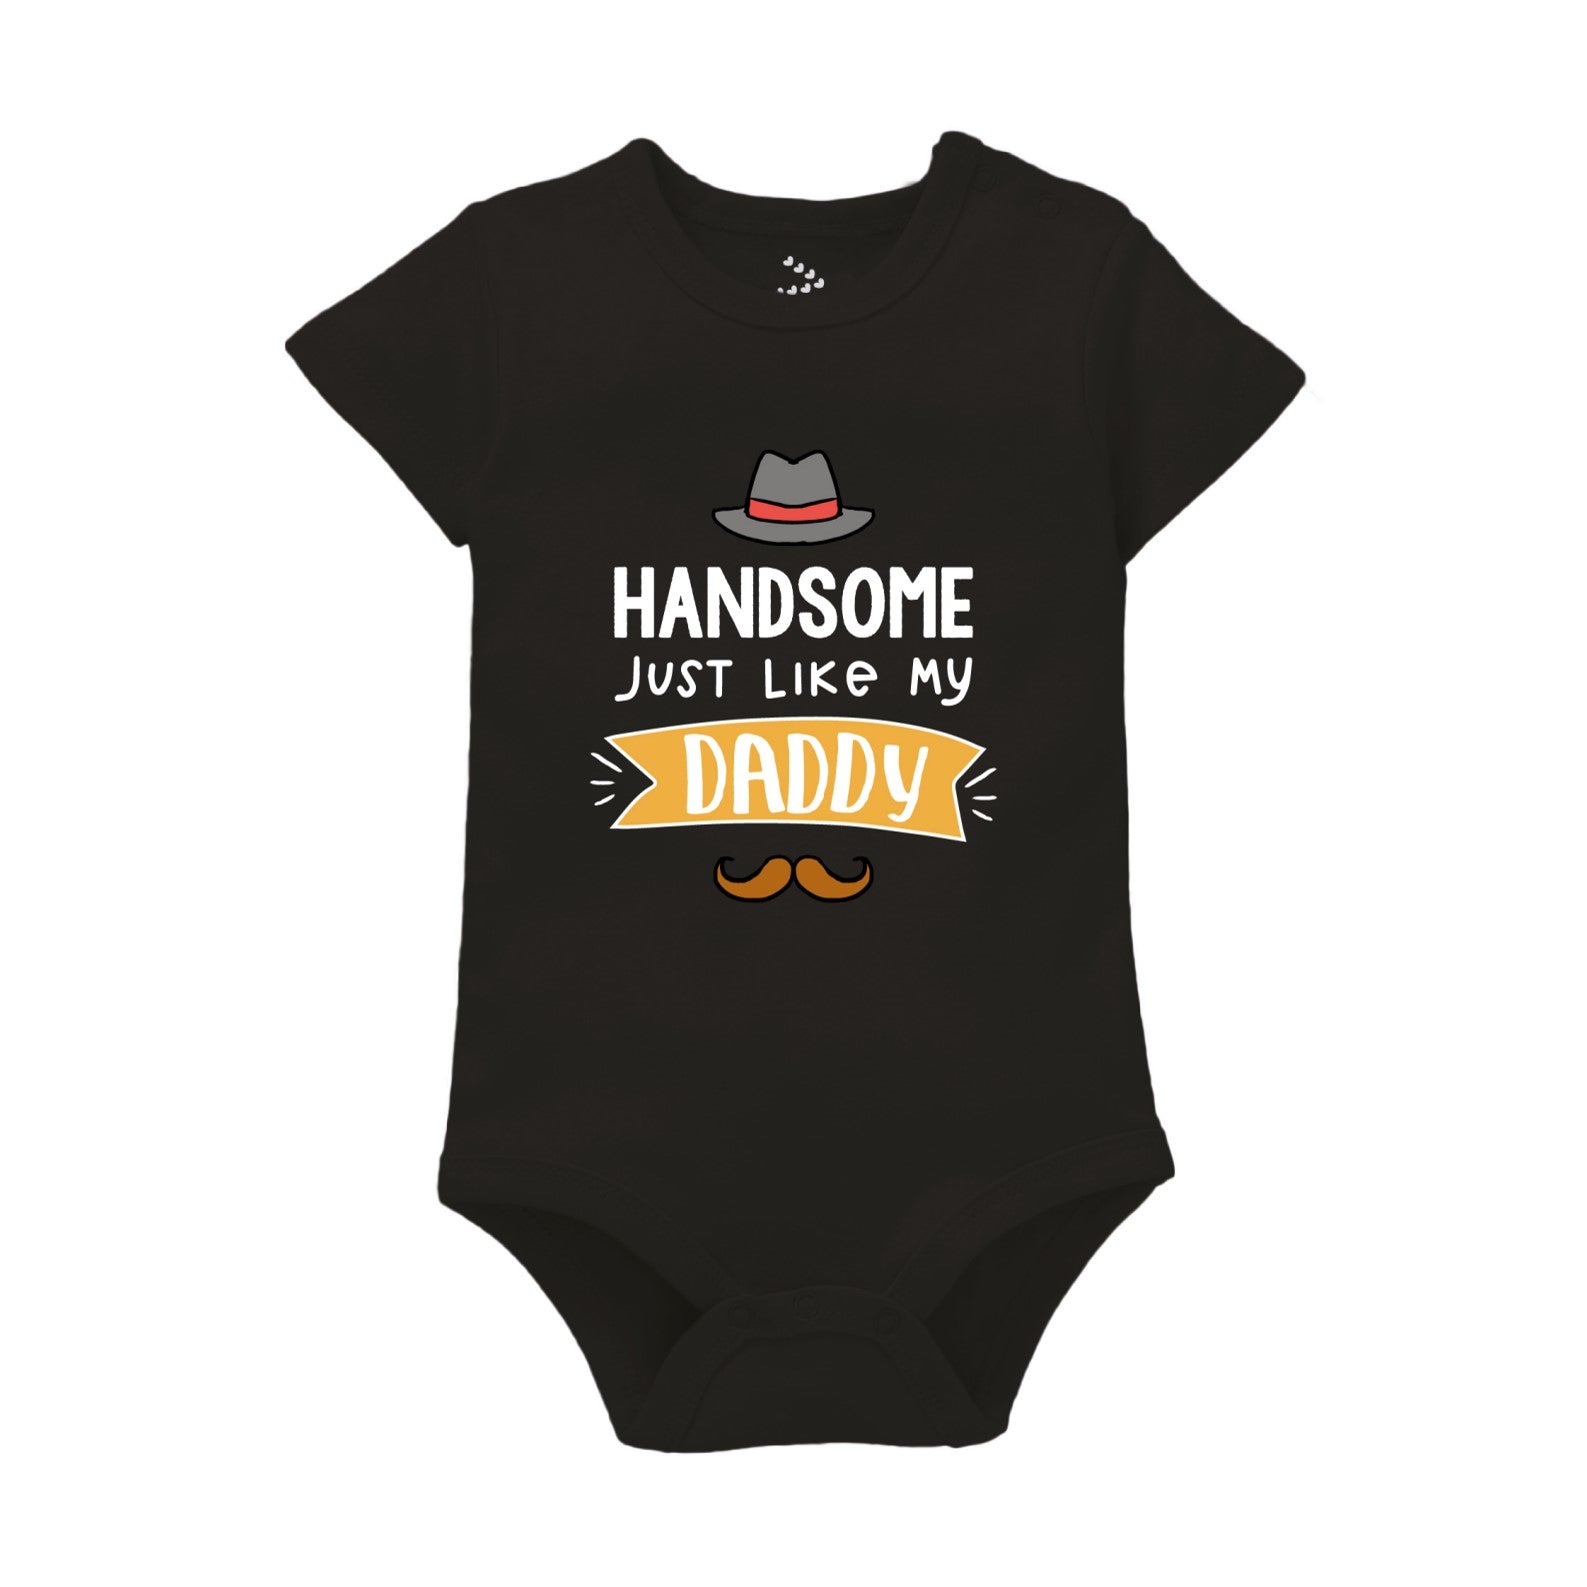 Handsome Just Like My Daddy Printed Baby Onesie